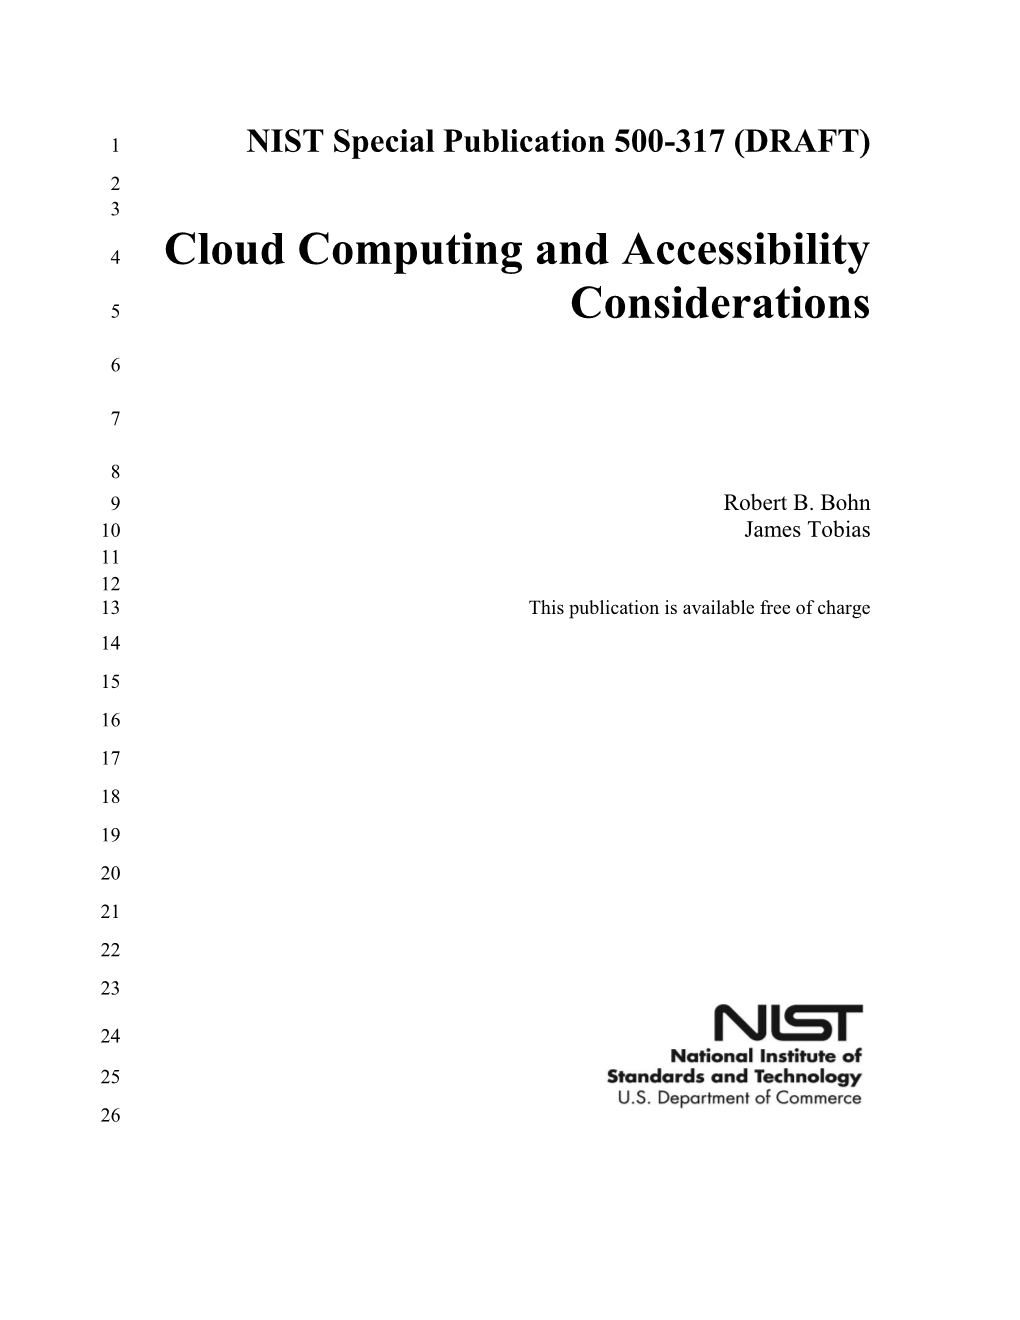 Cloud Computing and Accessibility Considerations